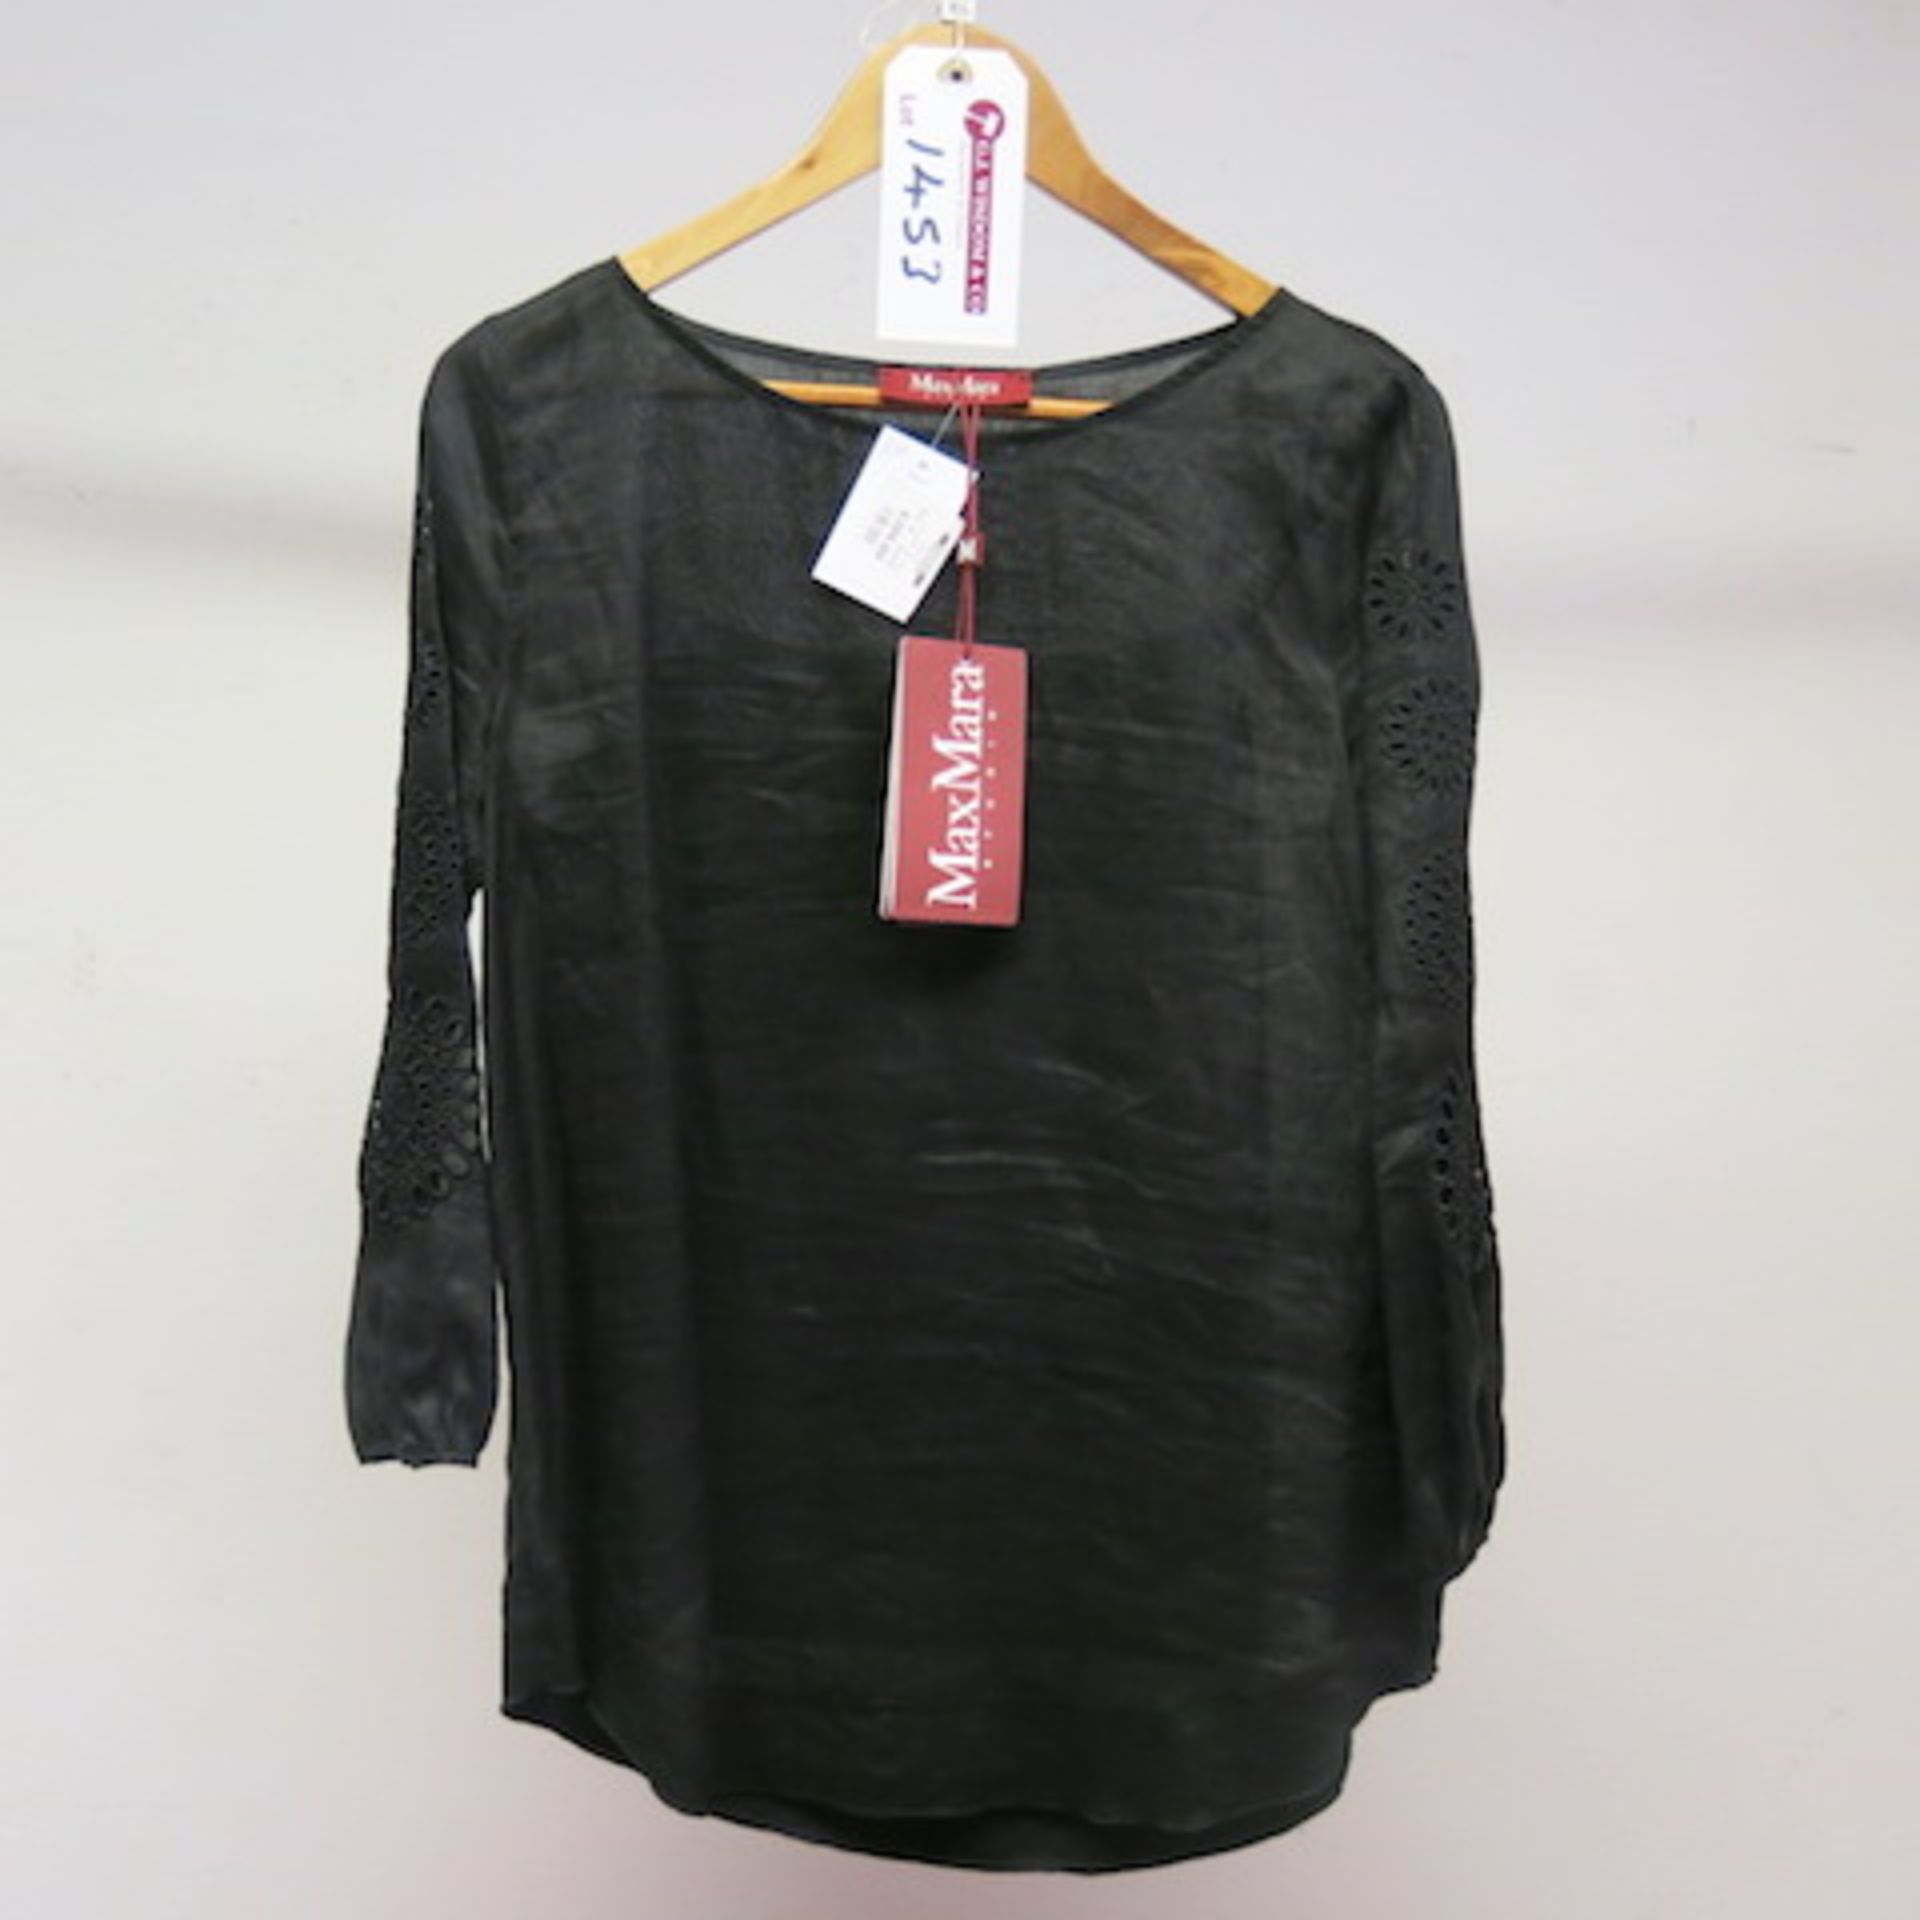 Maxmara Black Embrodied Sleeve Top, Size Small, RRP £209.00